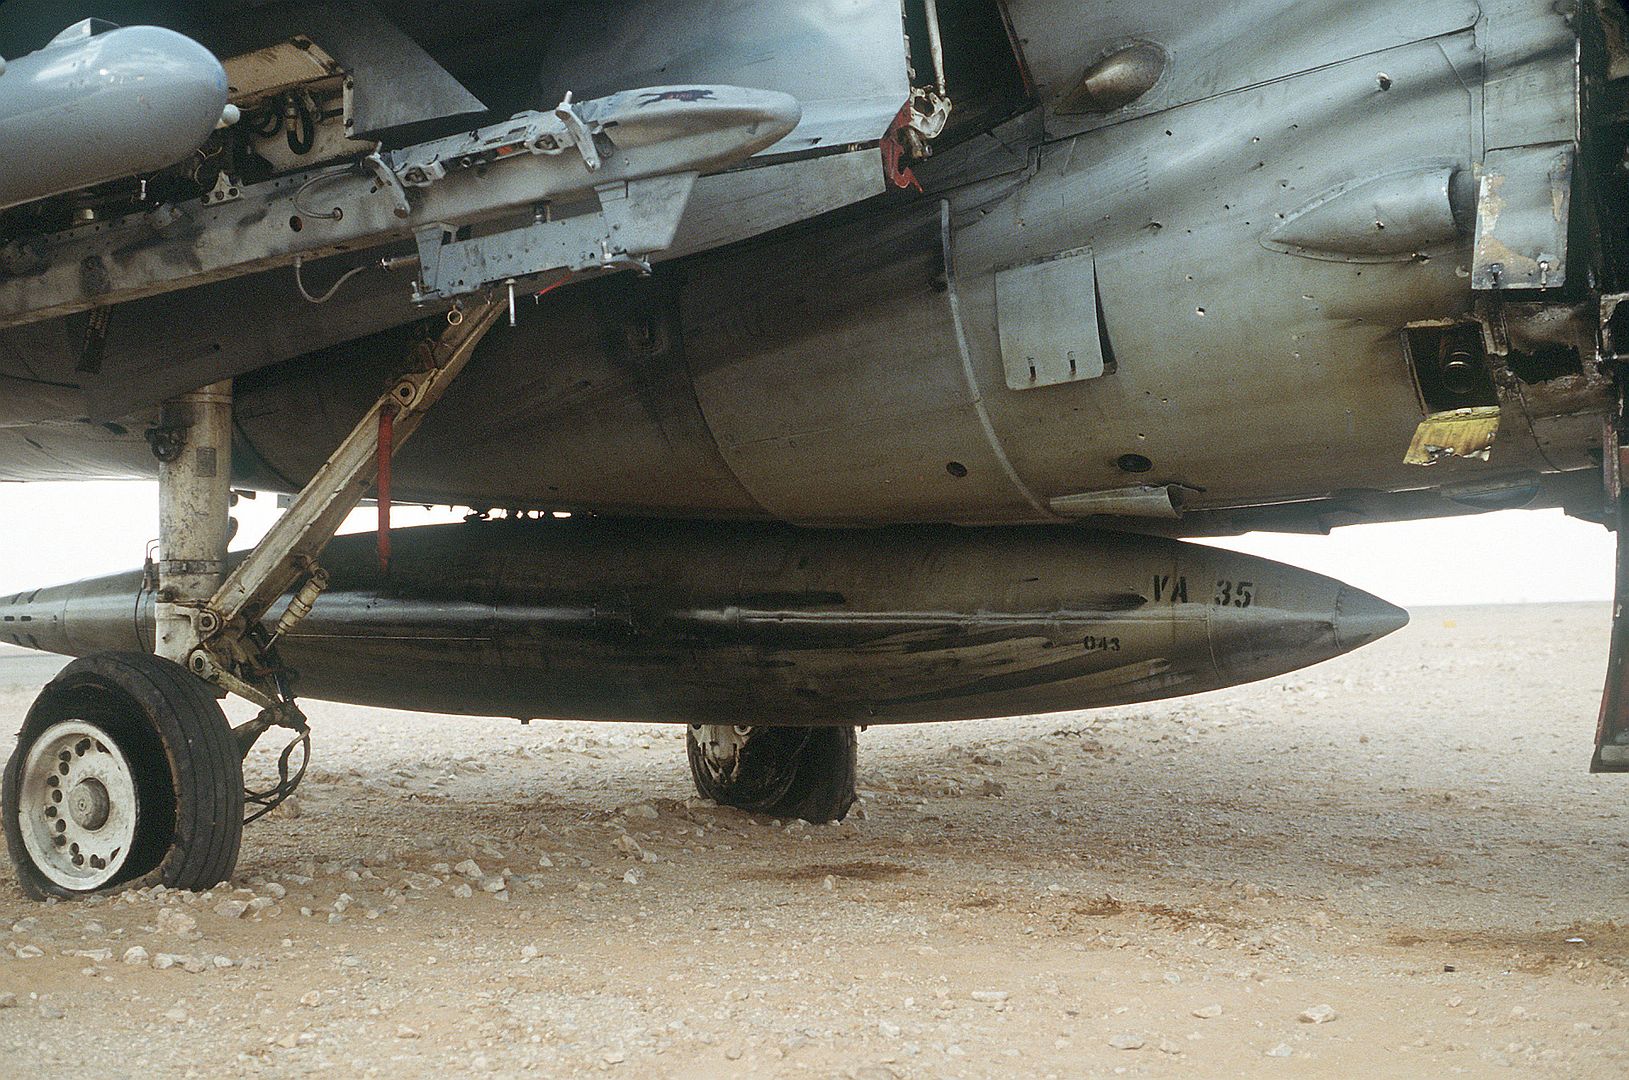 A 6E Intruder Attack Aircraft From Attack Squadron 35 Deployed From The Aircraft Carrier USS SARATOGA Shows Battle Damage From A Mission At The Start Of Operation Desert Storm 7